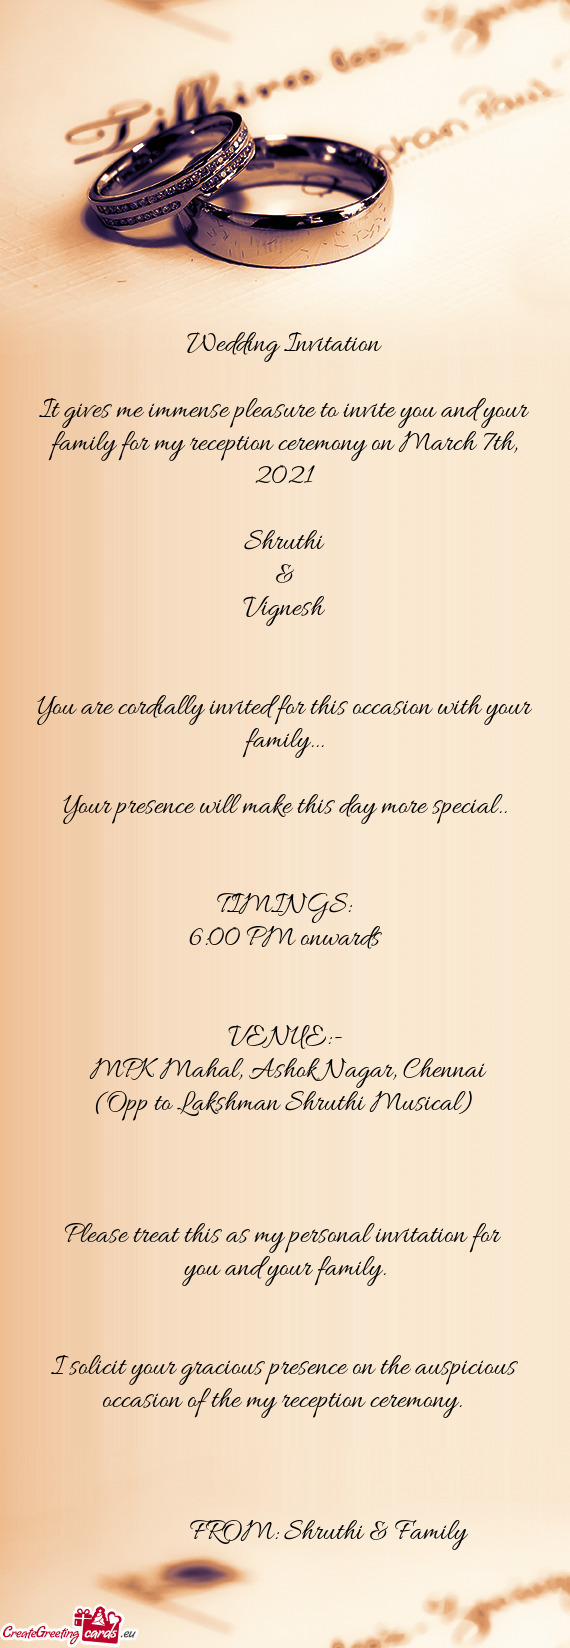 It gives me immense pleasure to invite you and your family for my reception ceremony on March 7th, 2